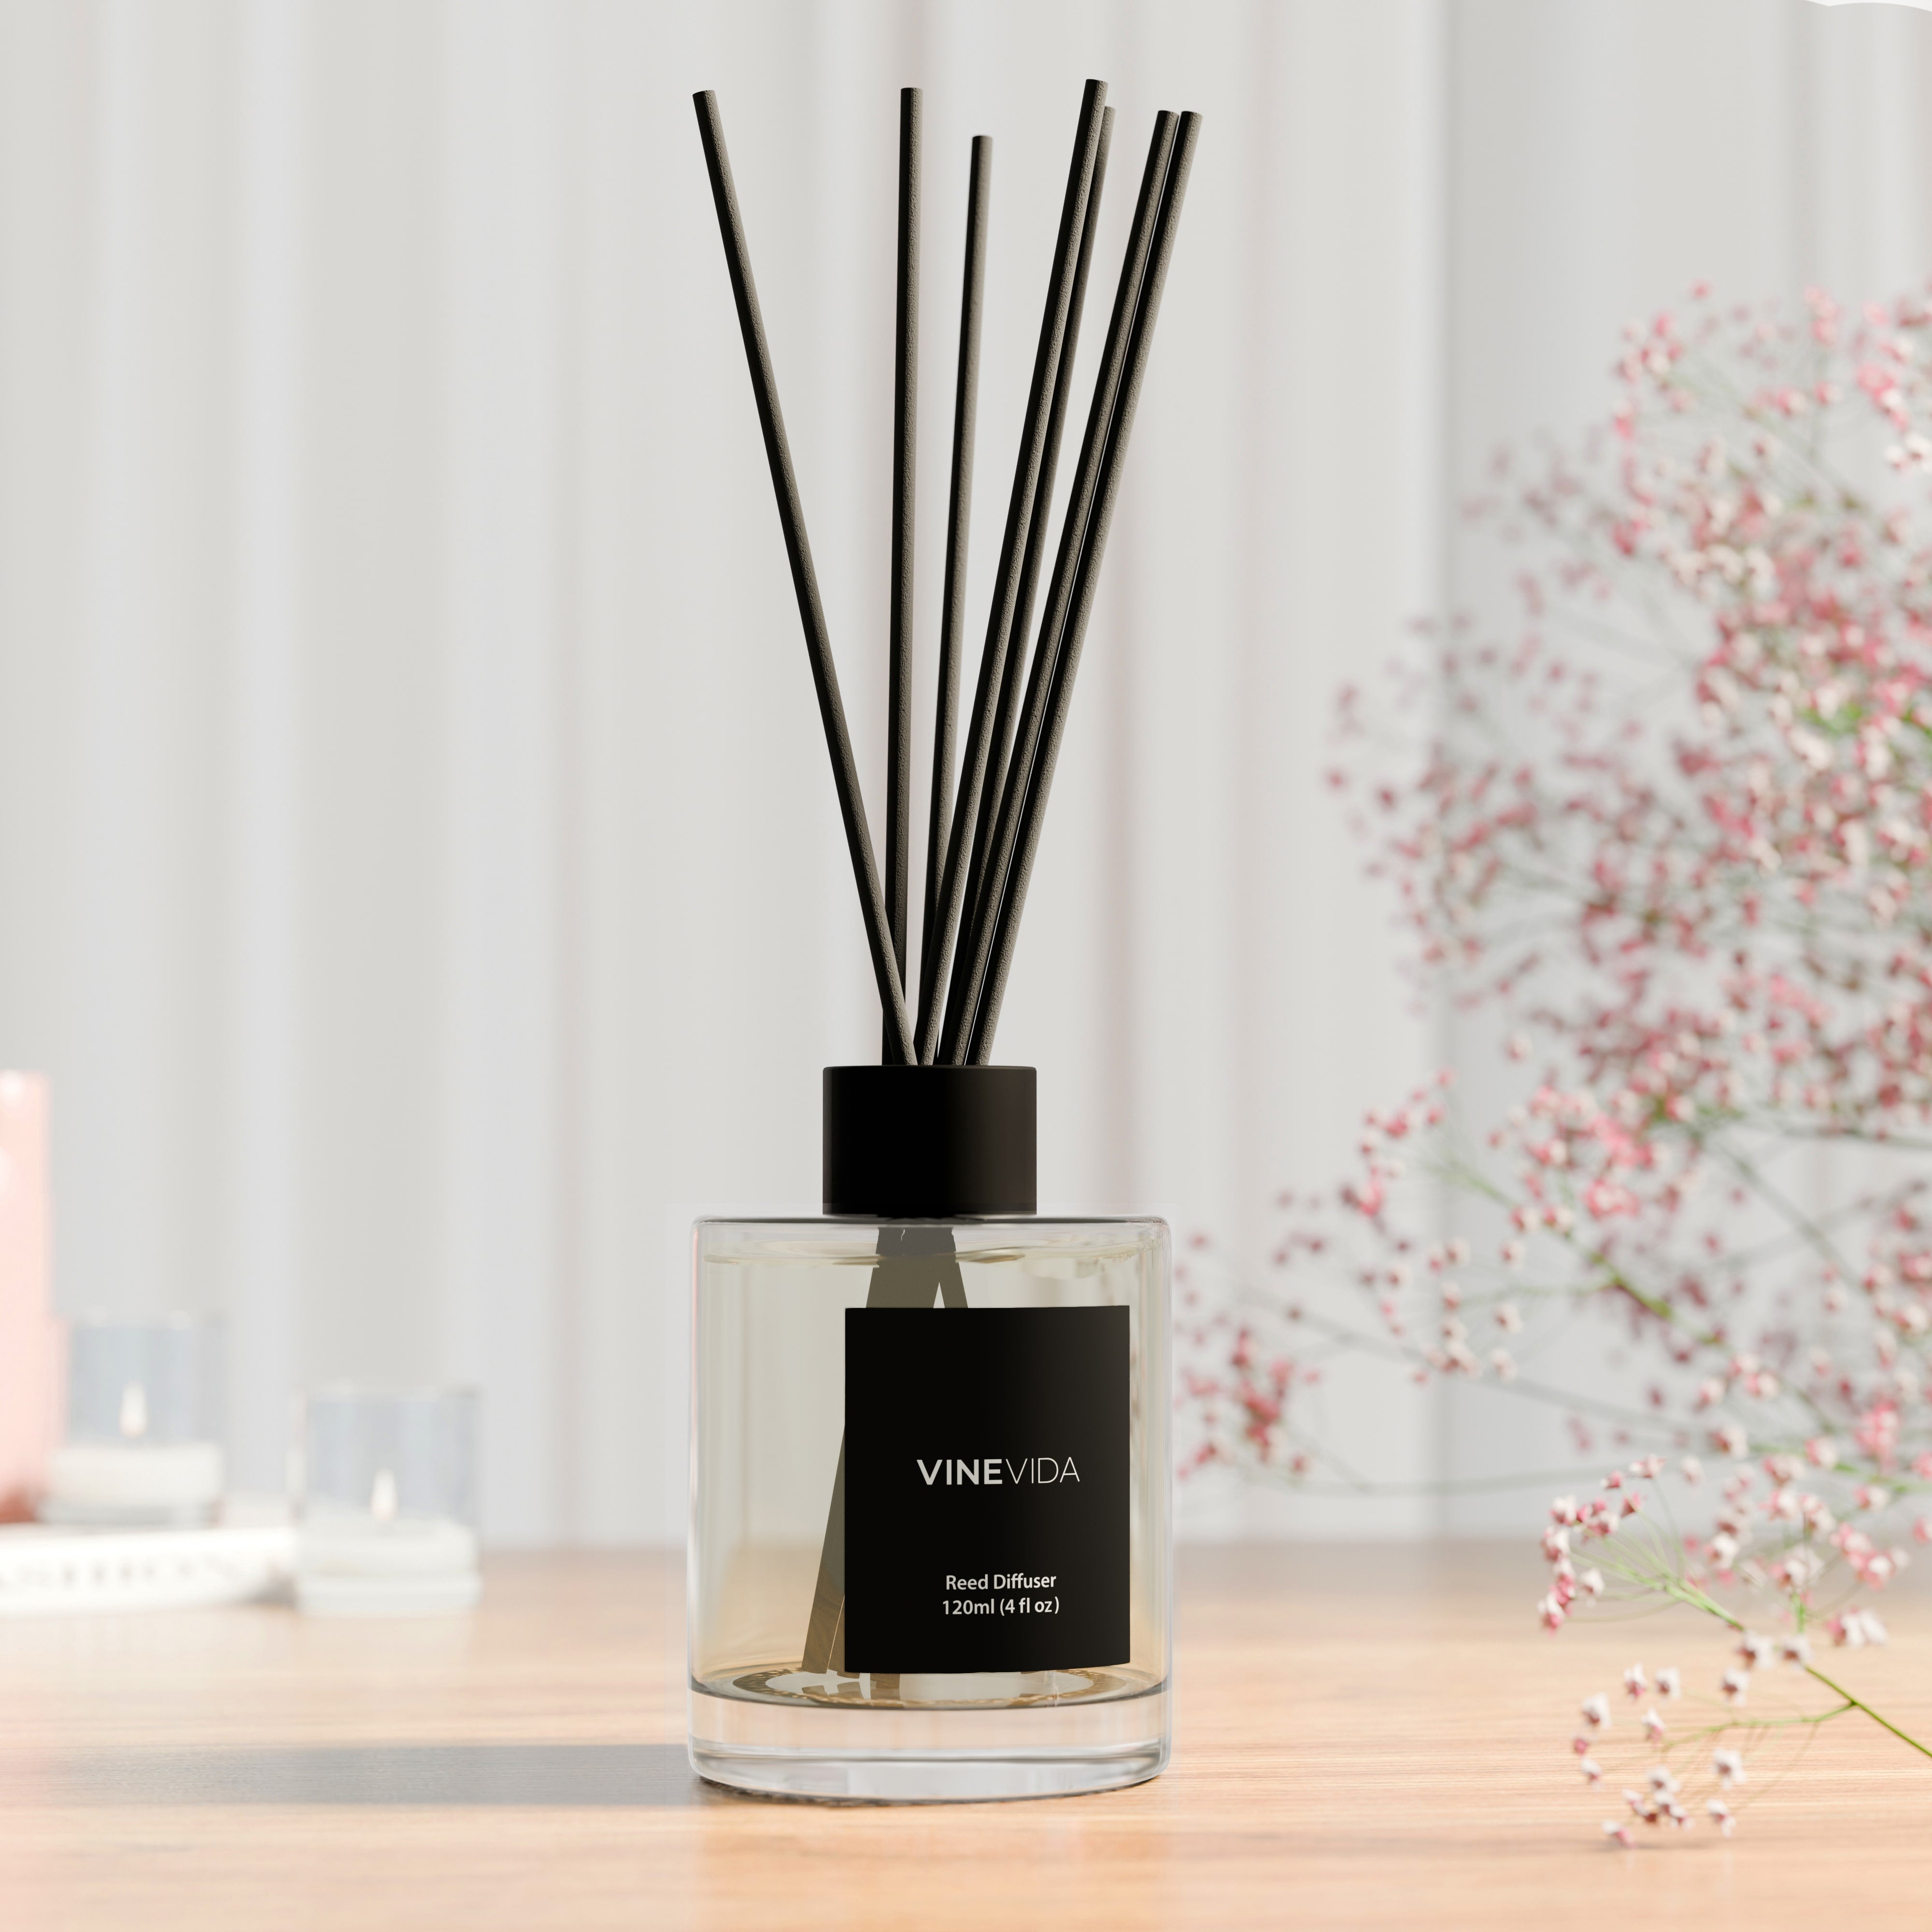 NO. 1117 Reed Diffuser - Inspired by: Salted Caramel by Bath & Body Works